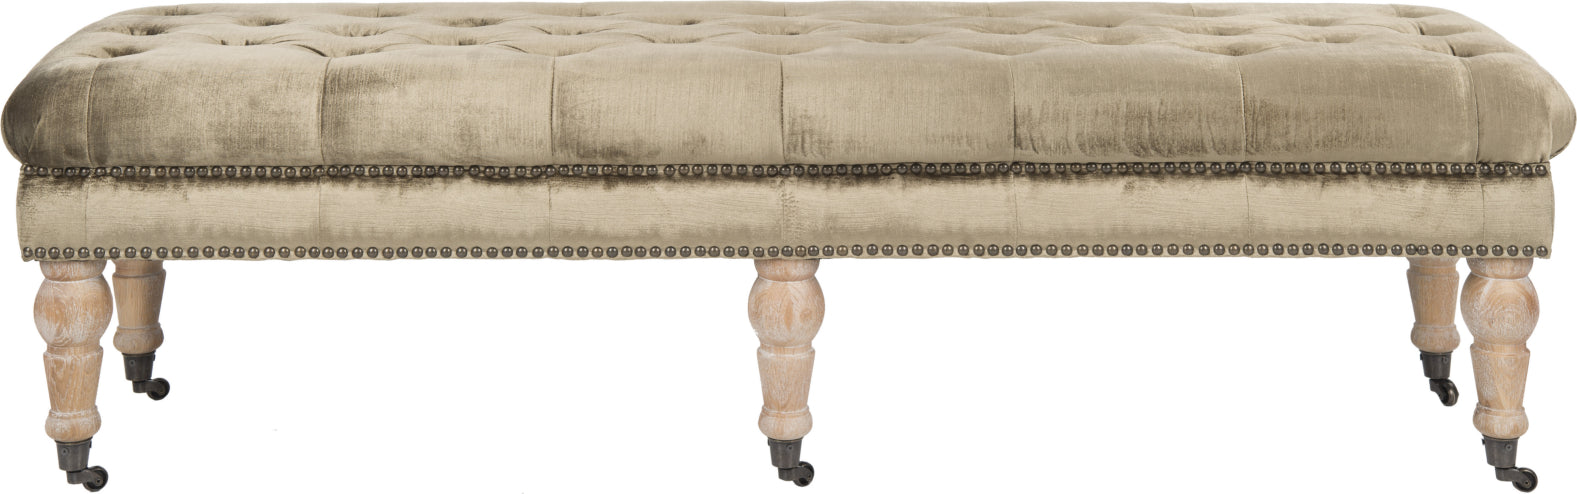 Safavieh Barney Tufted Bench-Brass Nail Heads Antique Sage and Pickled Oak Furniture main image